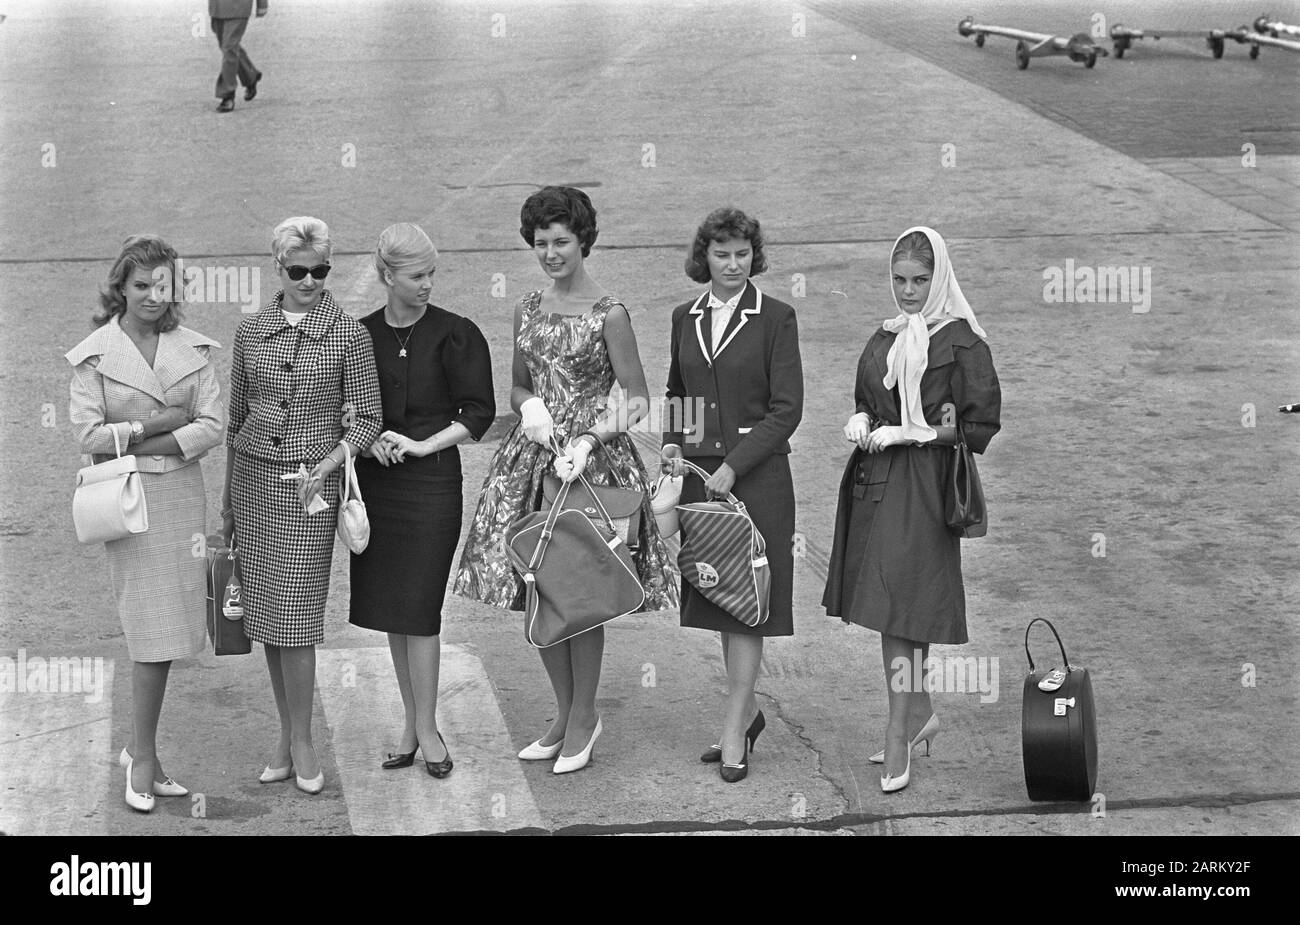 Departure to Palermo from the beauty queen for the Miss Europe election. Miss Belgium, Miss Luxembourg, Miss Denmark, Miss Holland (Peggy Erwich), Miss Iceland and Miss [TEXT NOT COMPLETE] Date: 29 July 1959 Keywords: pageant, women Personal name: Erwich, Peggy Institution name: Miss Europe Stock Photo